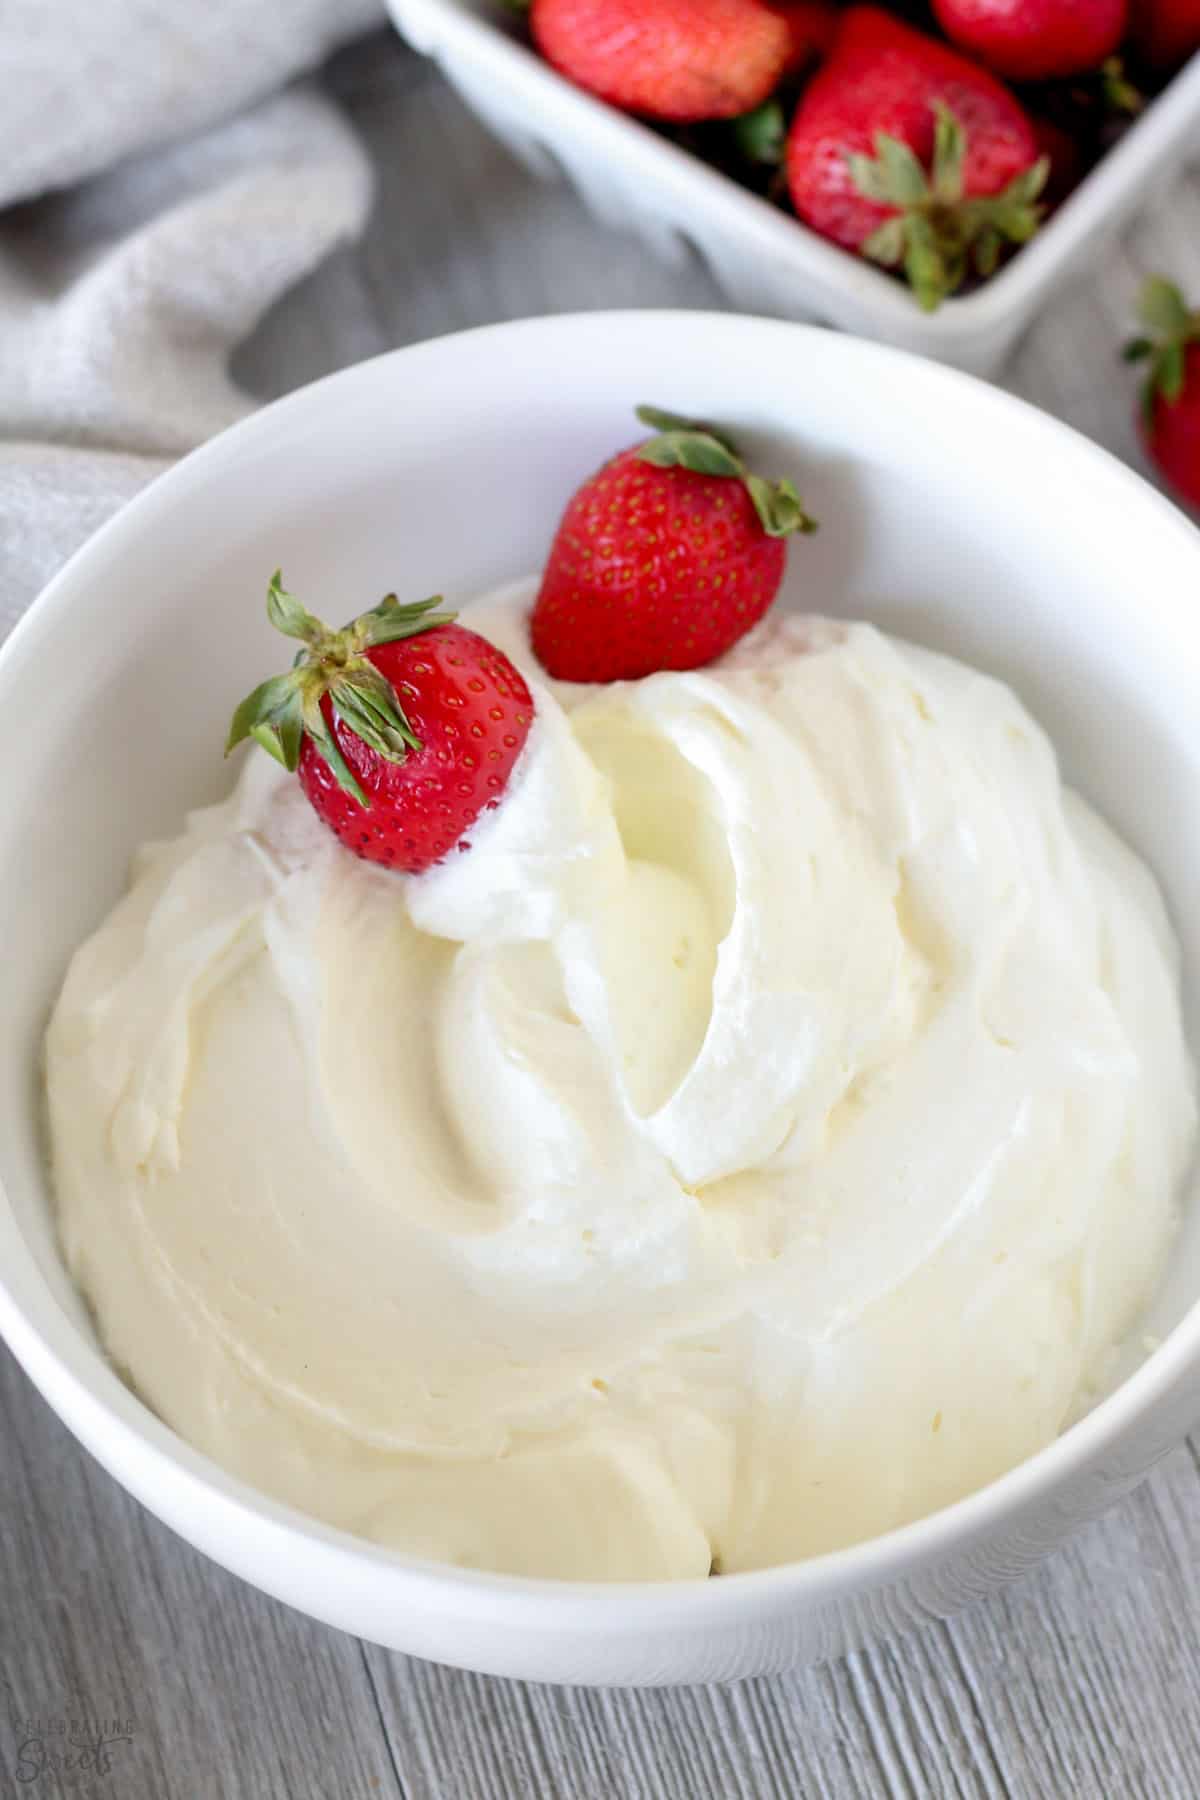 Whipped cream in a white bowl with strawberries.